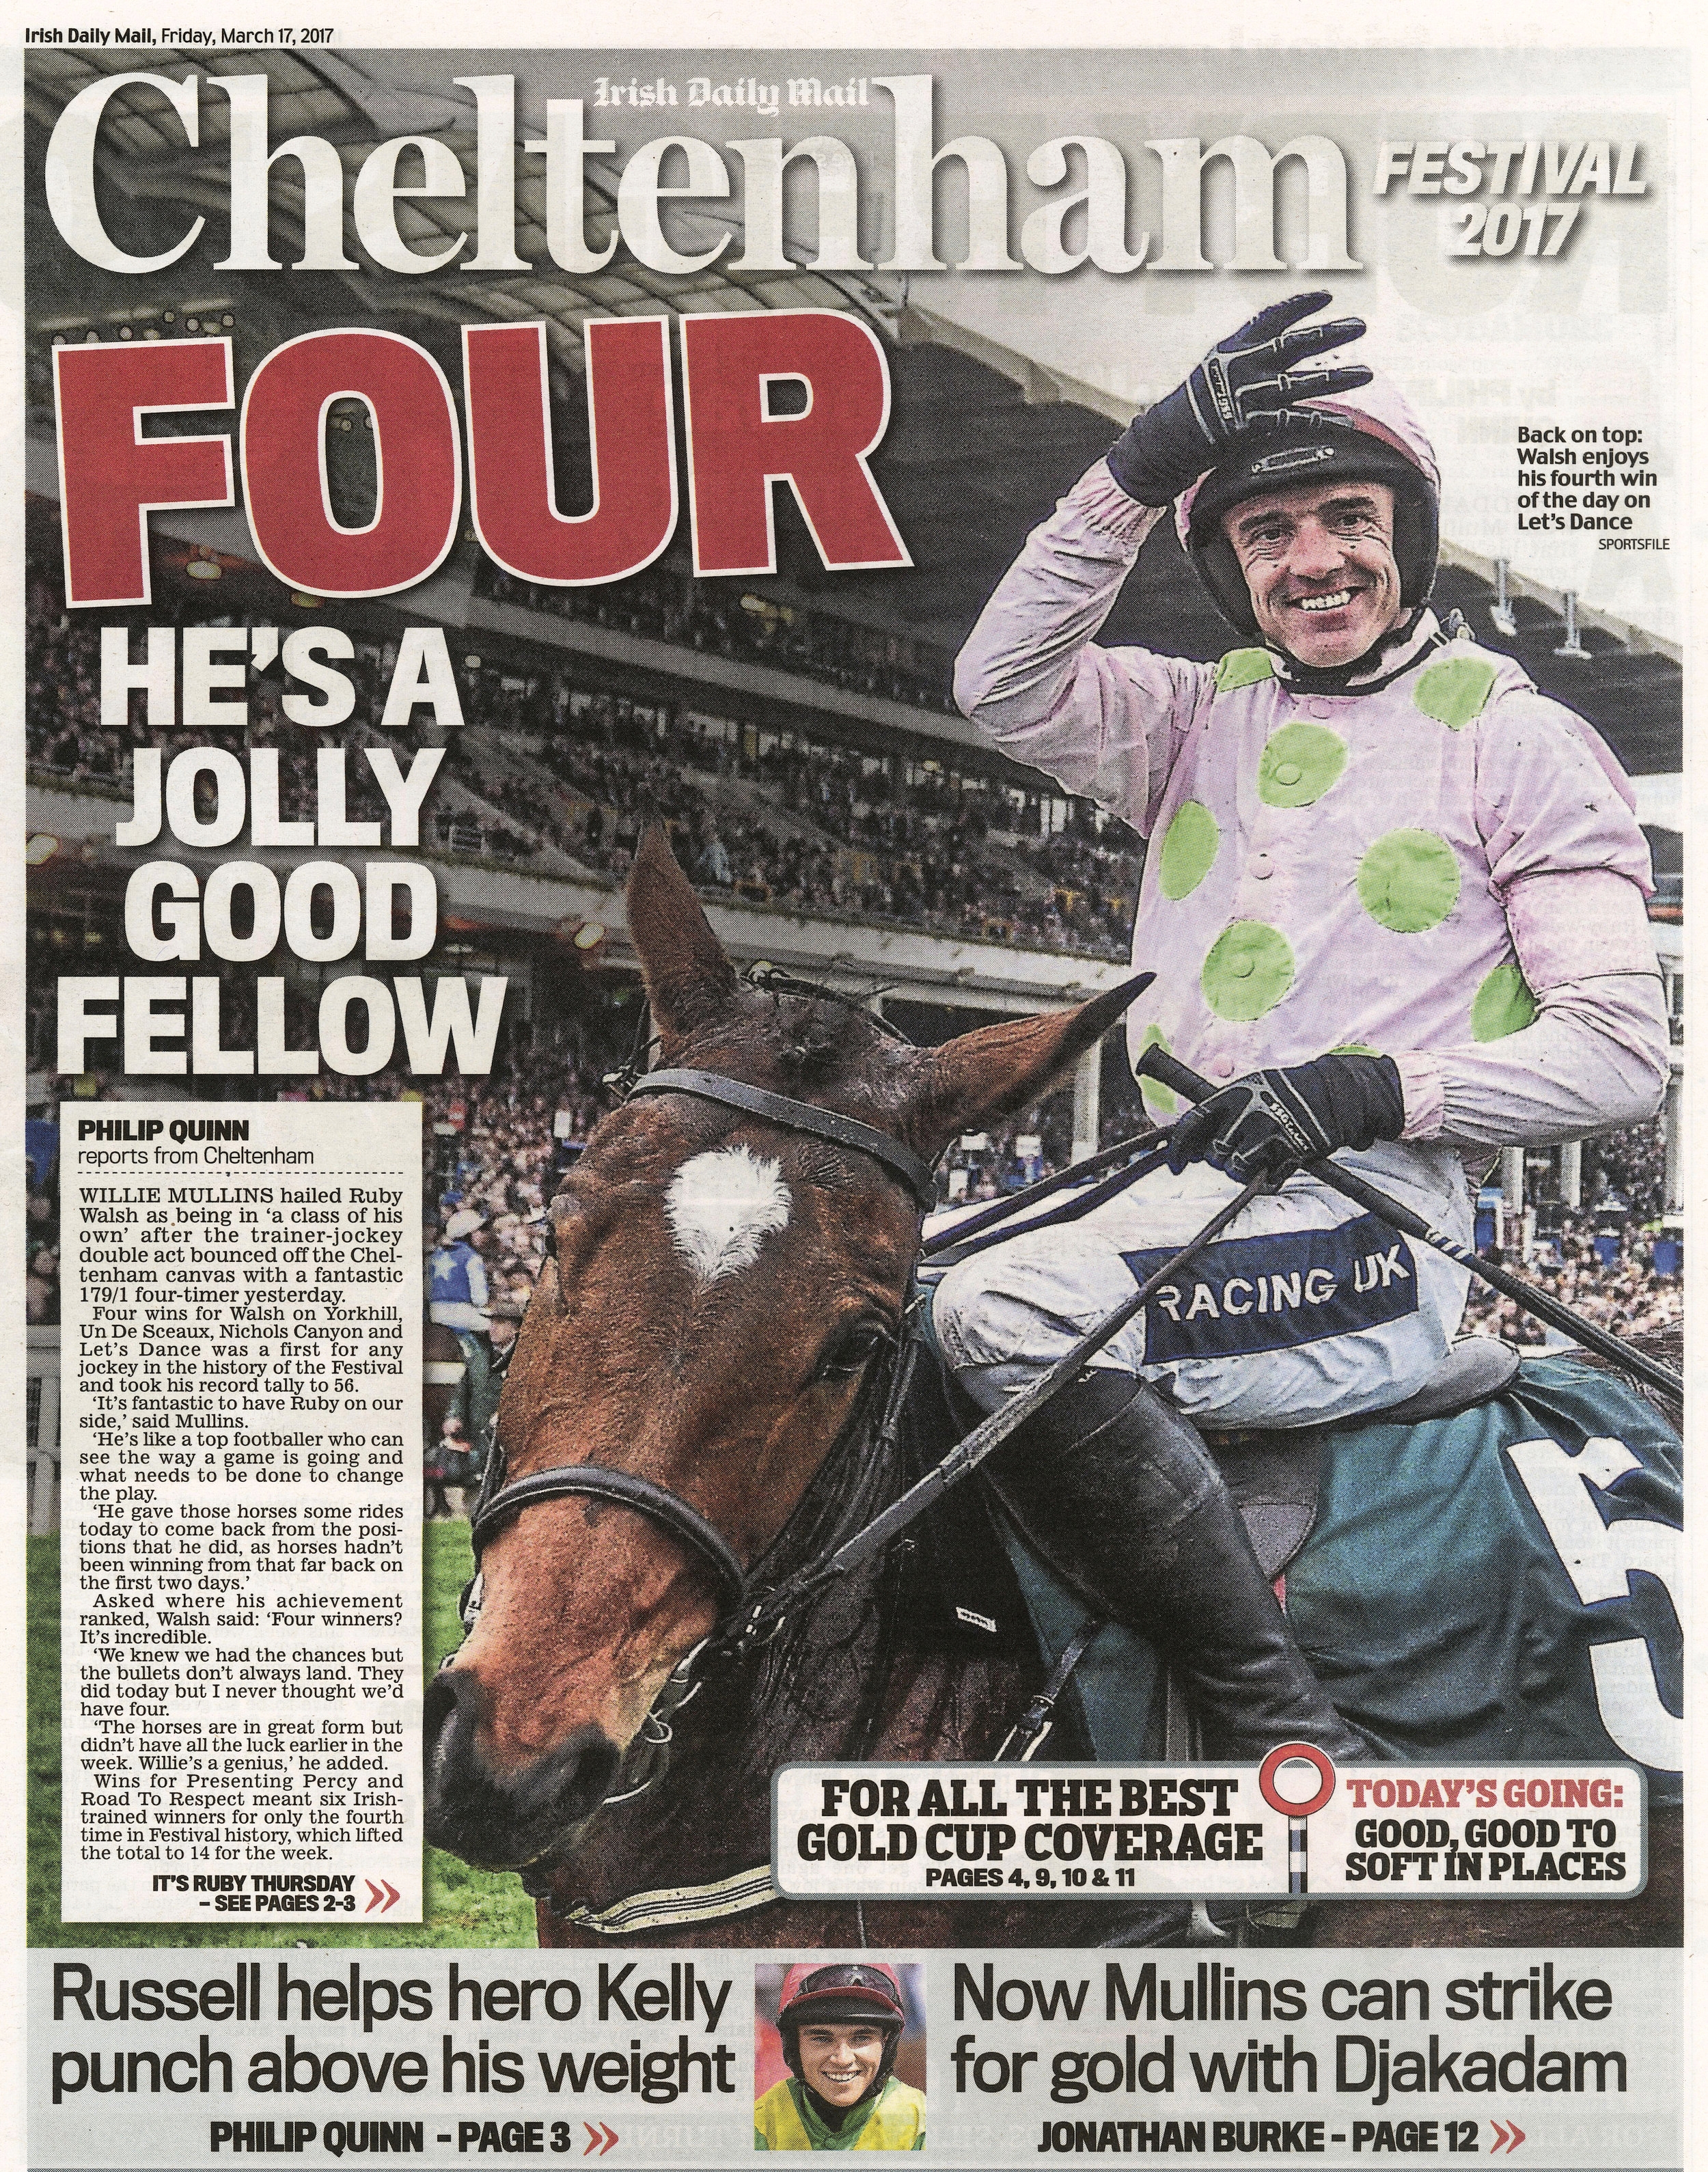  Ruby Walsh celebrates his fourth win of the day on Let's Dance at the Cheltenham Festival March 17 2017  Irish Daily Mail  